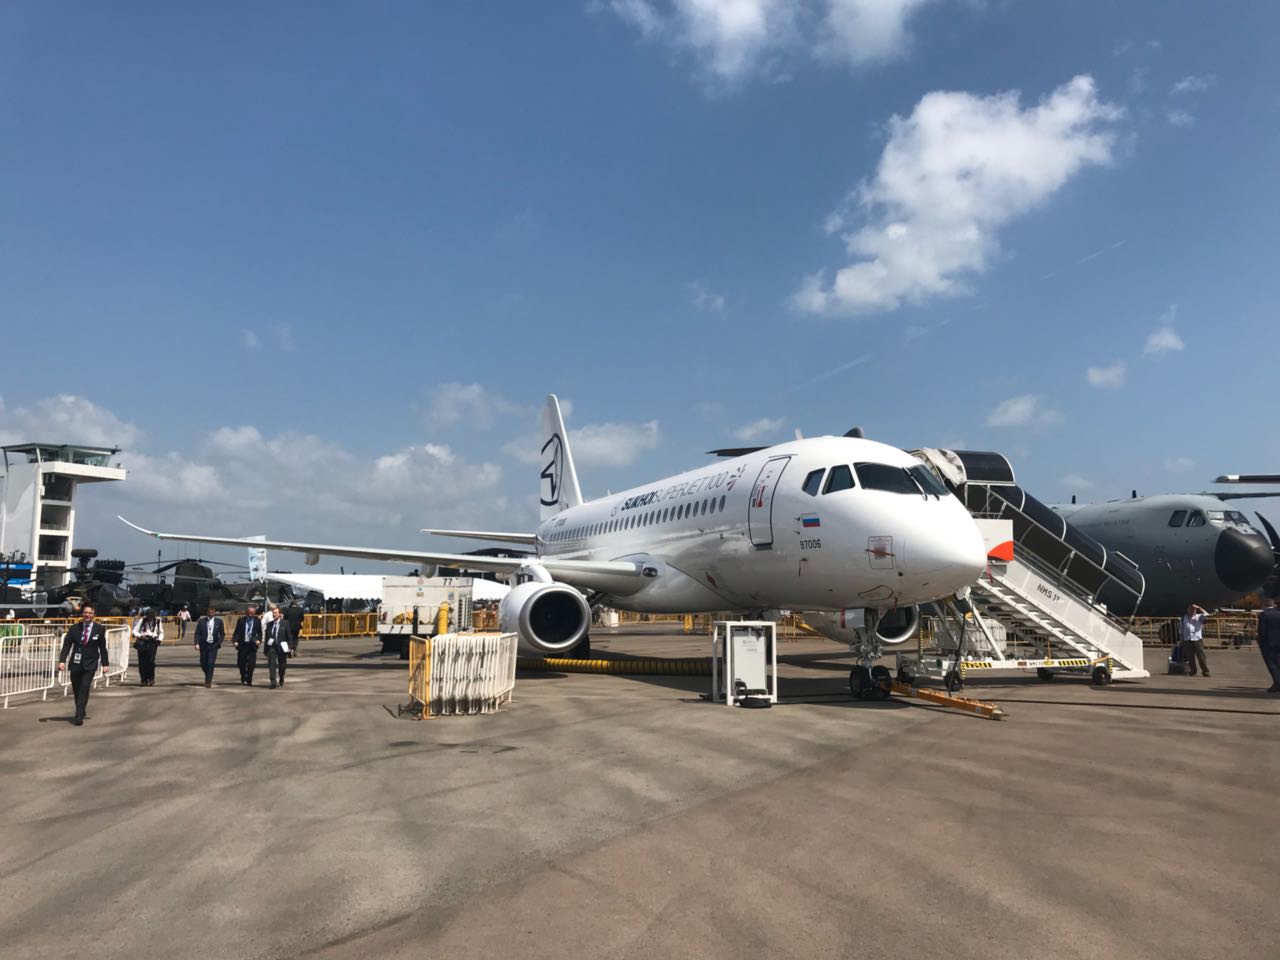 United Aircraft Corporation will demonstrate its aircraft lineup at Singapore Airshow 2018